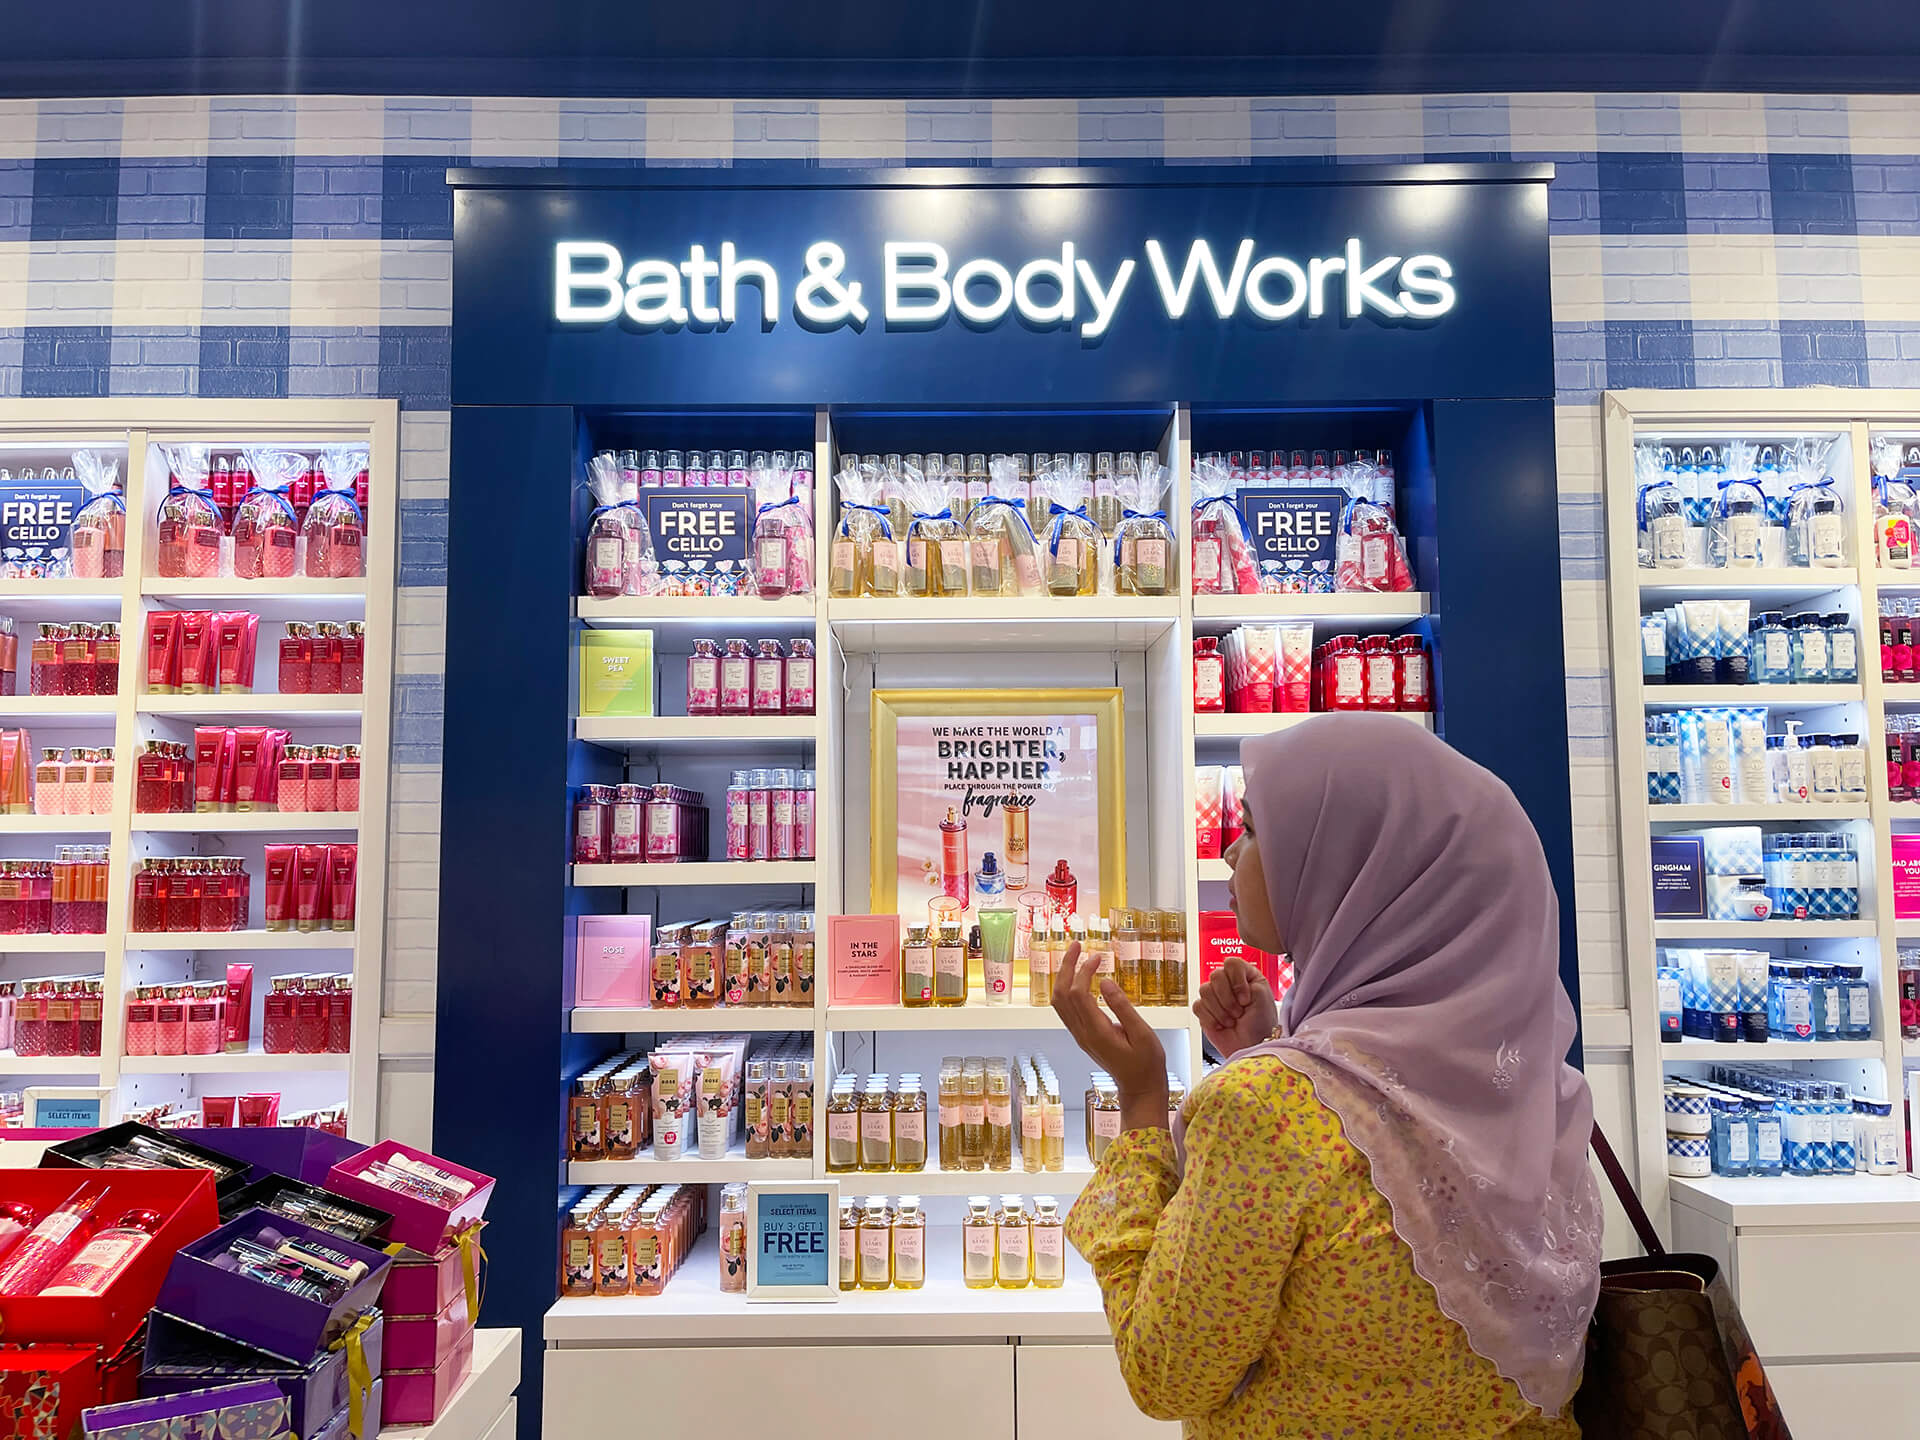 Smell good, look good with Bath & Body Works.